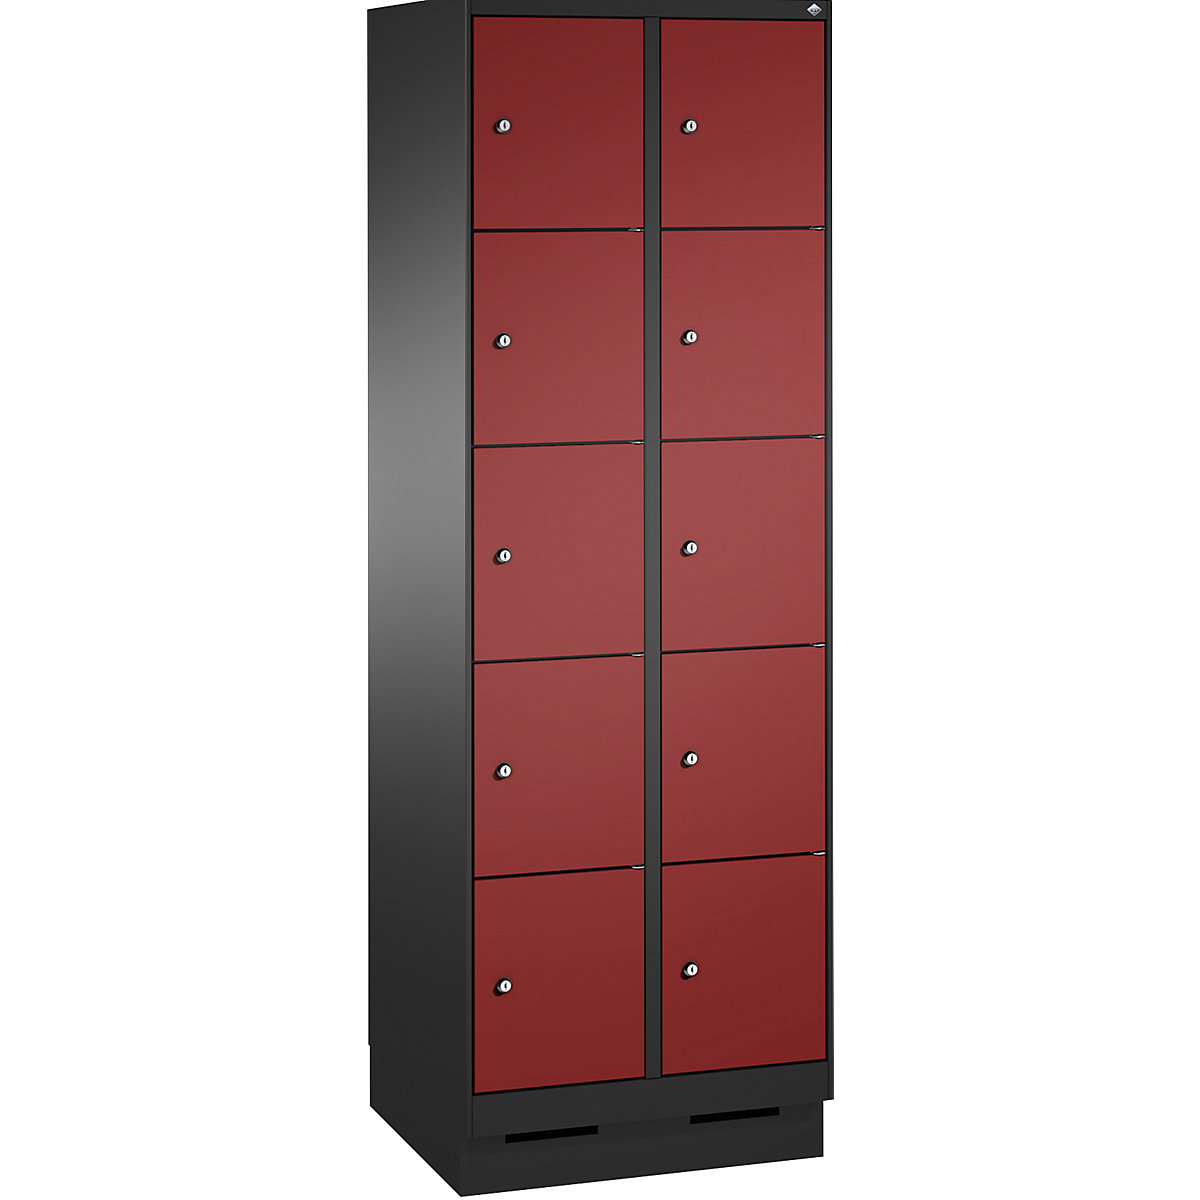 EVOLO locker unit, with plinth – C+P, 2 compartments, 5 shelf compartments each, compartment width 300 mm, black grey / ruby red-7